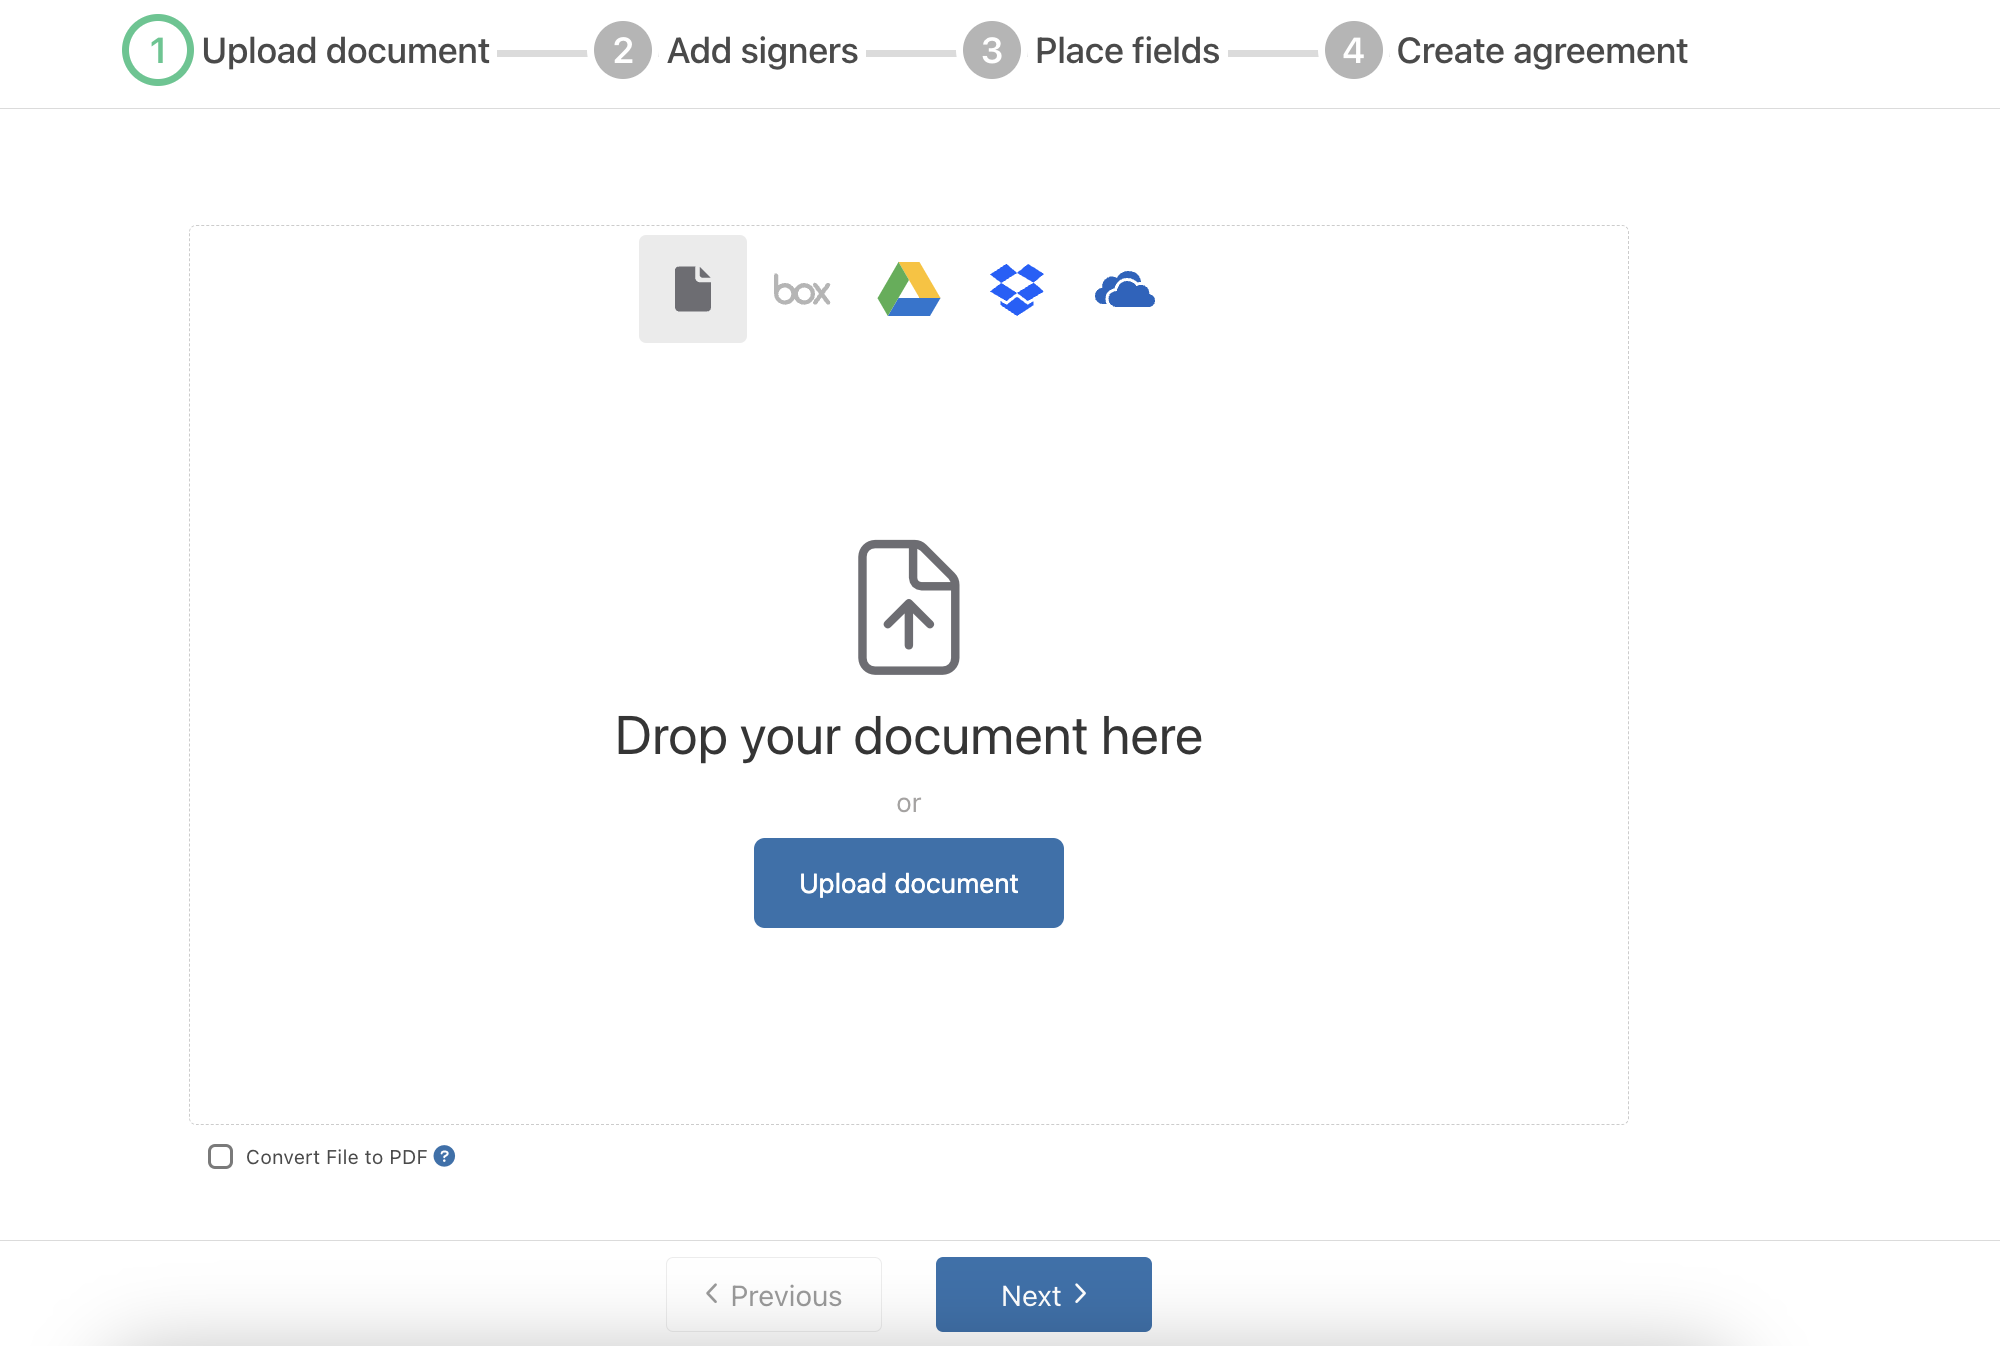 Upload your document